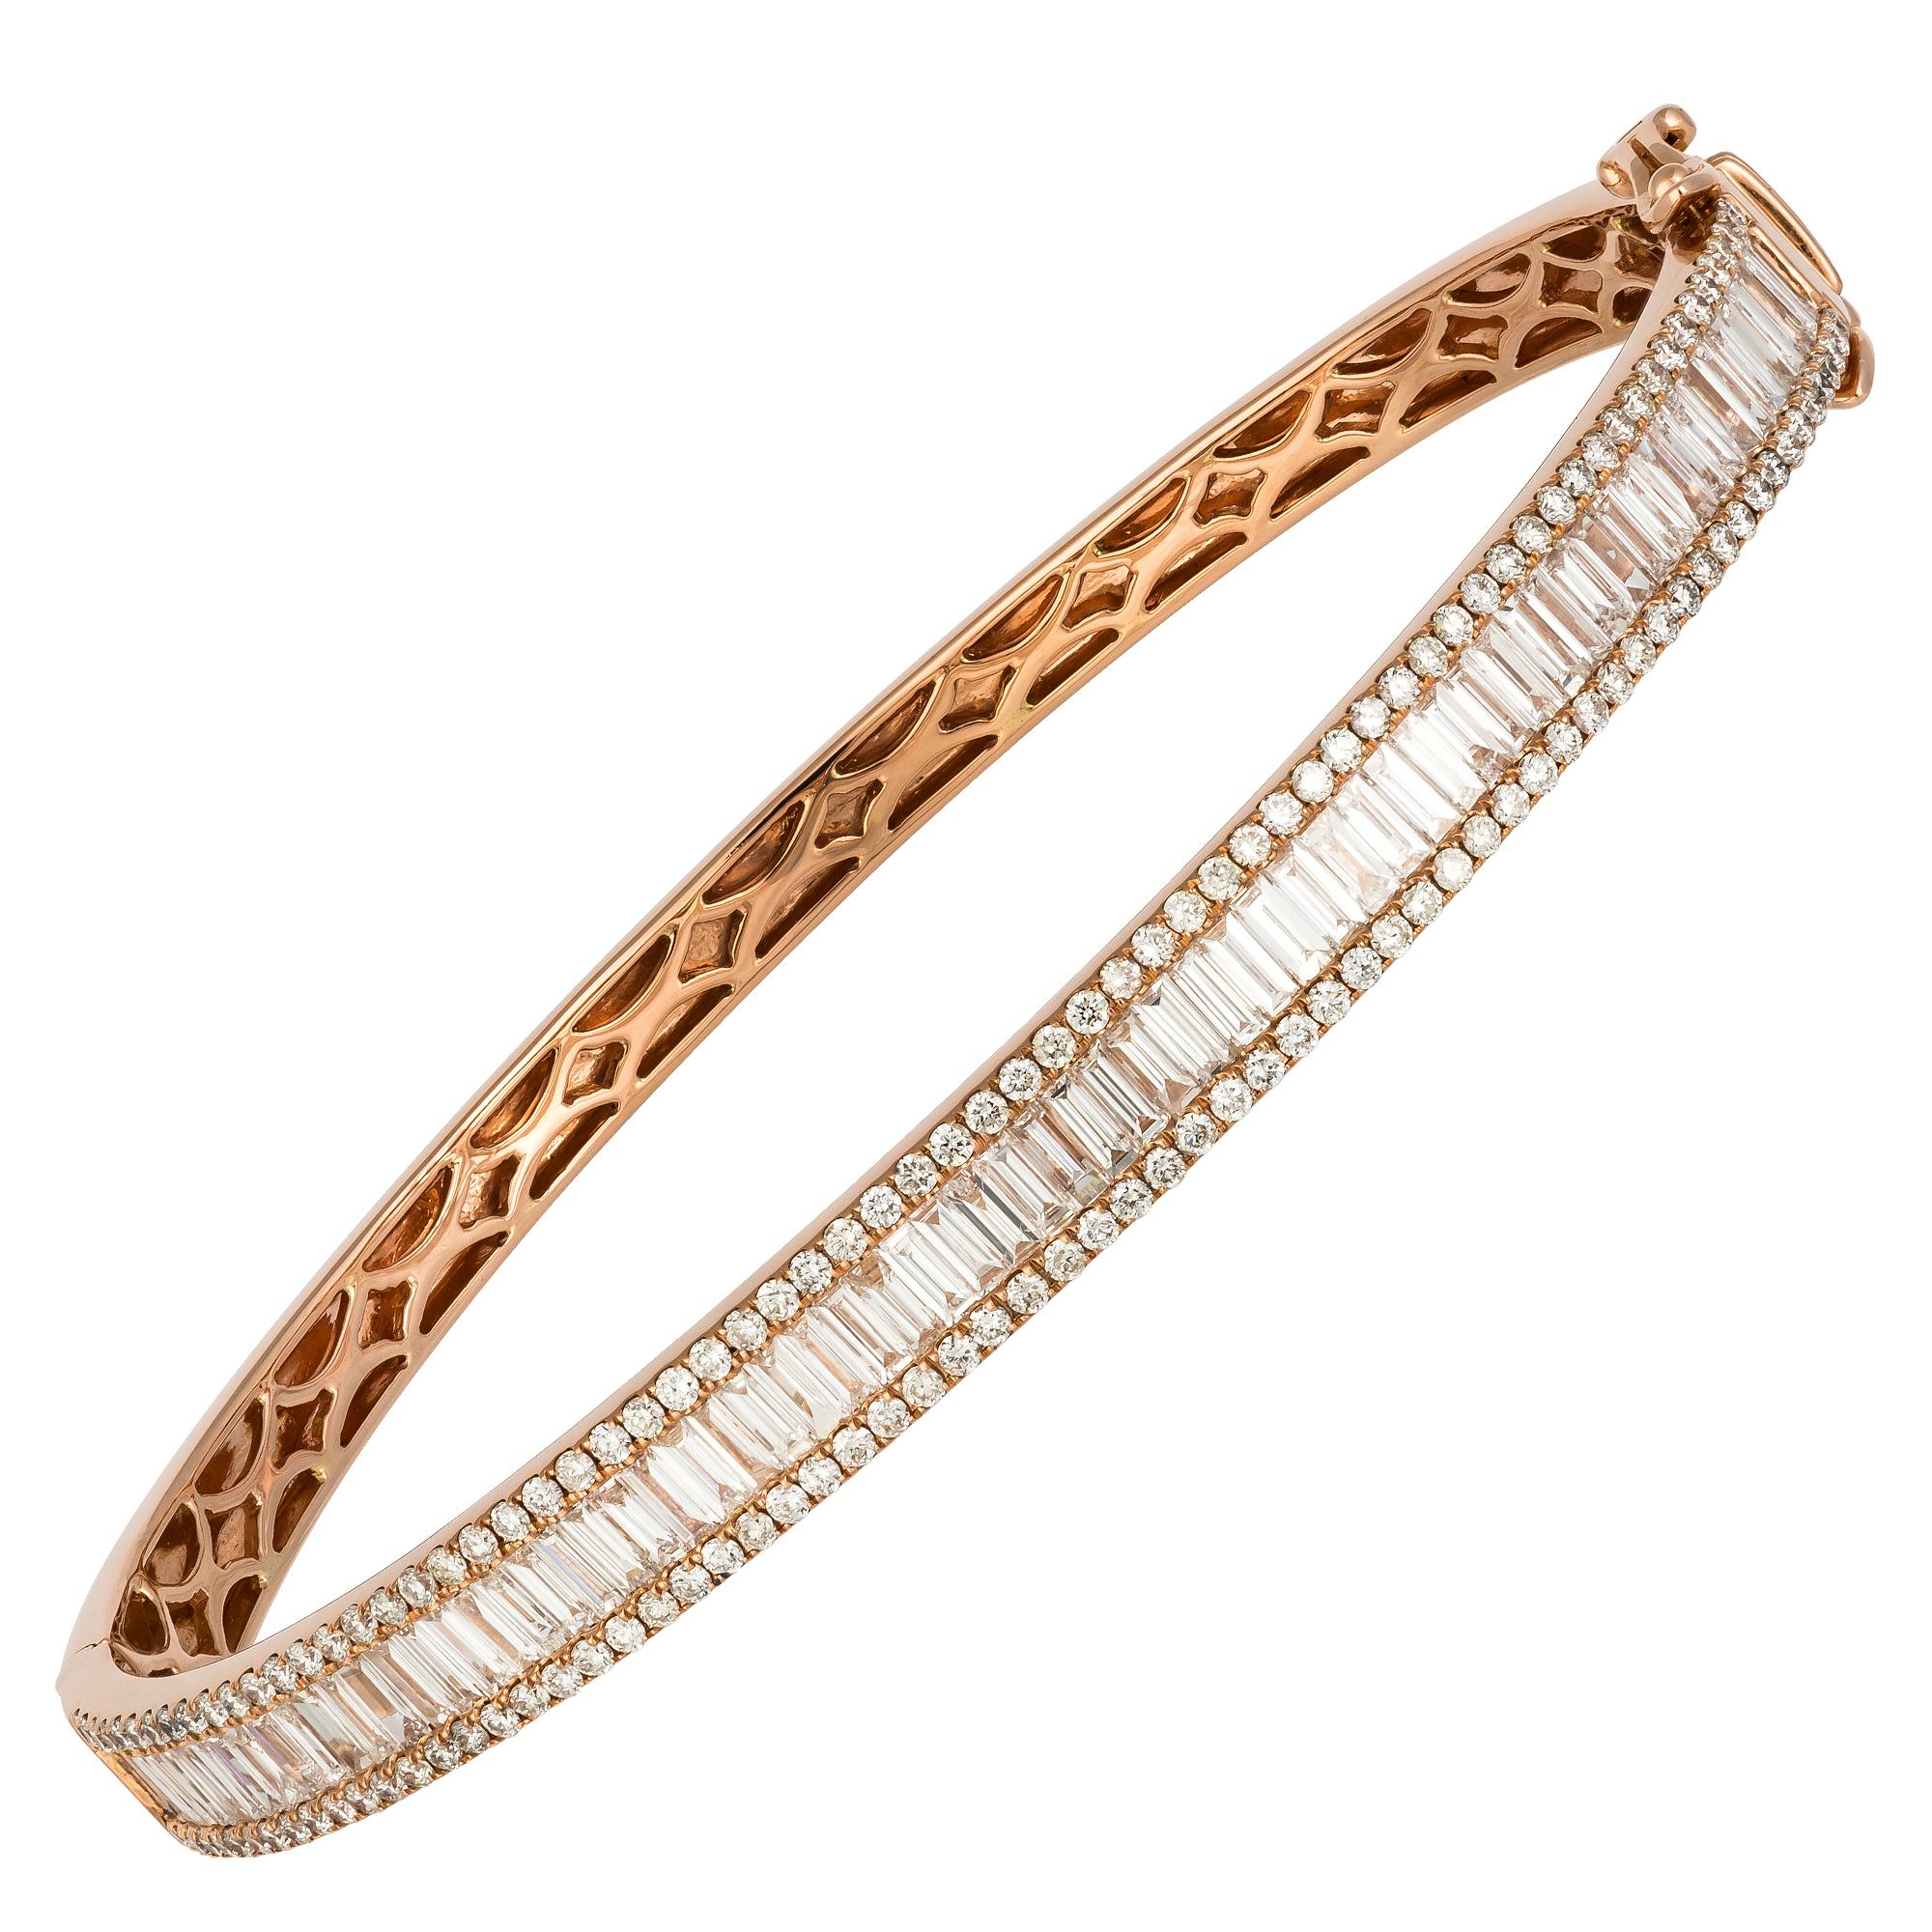 Bangle BRACELET 18K Rose Gold 

Diamond 0.72 Cts/136 Pcs
TB 2.38 Cts/57 Pcs
Weight 15.8 grams

With a heritage of ancient fine Swiss jewelry traditions, NATKINA is a Geneva based jewellery brand, which creates modern jewellery masterpieces suitable